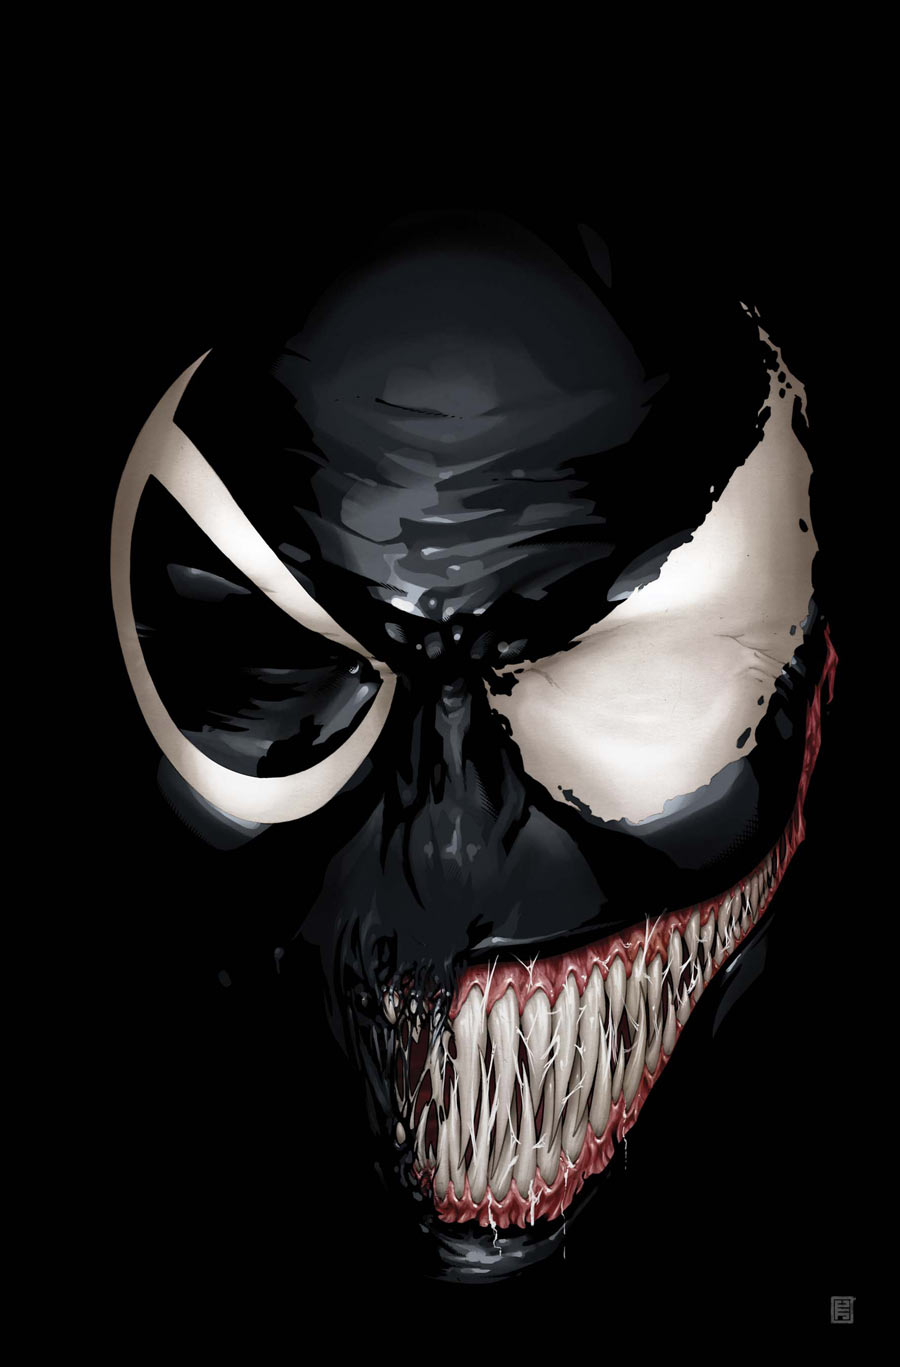 Venom 9, the mix of controlled and savage is pretty badass